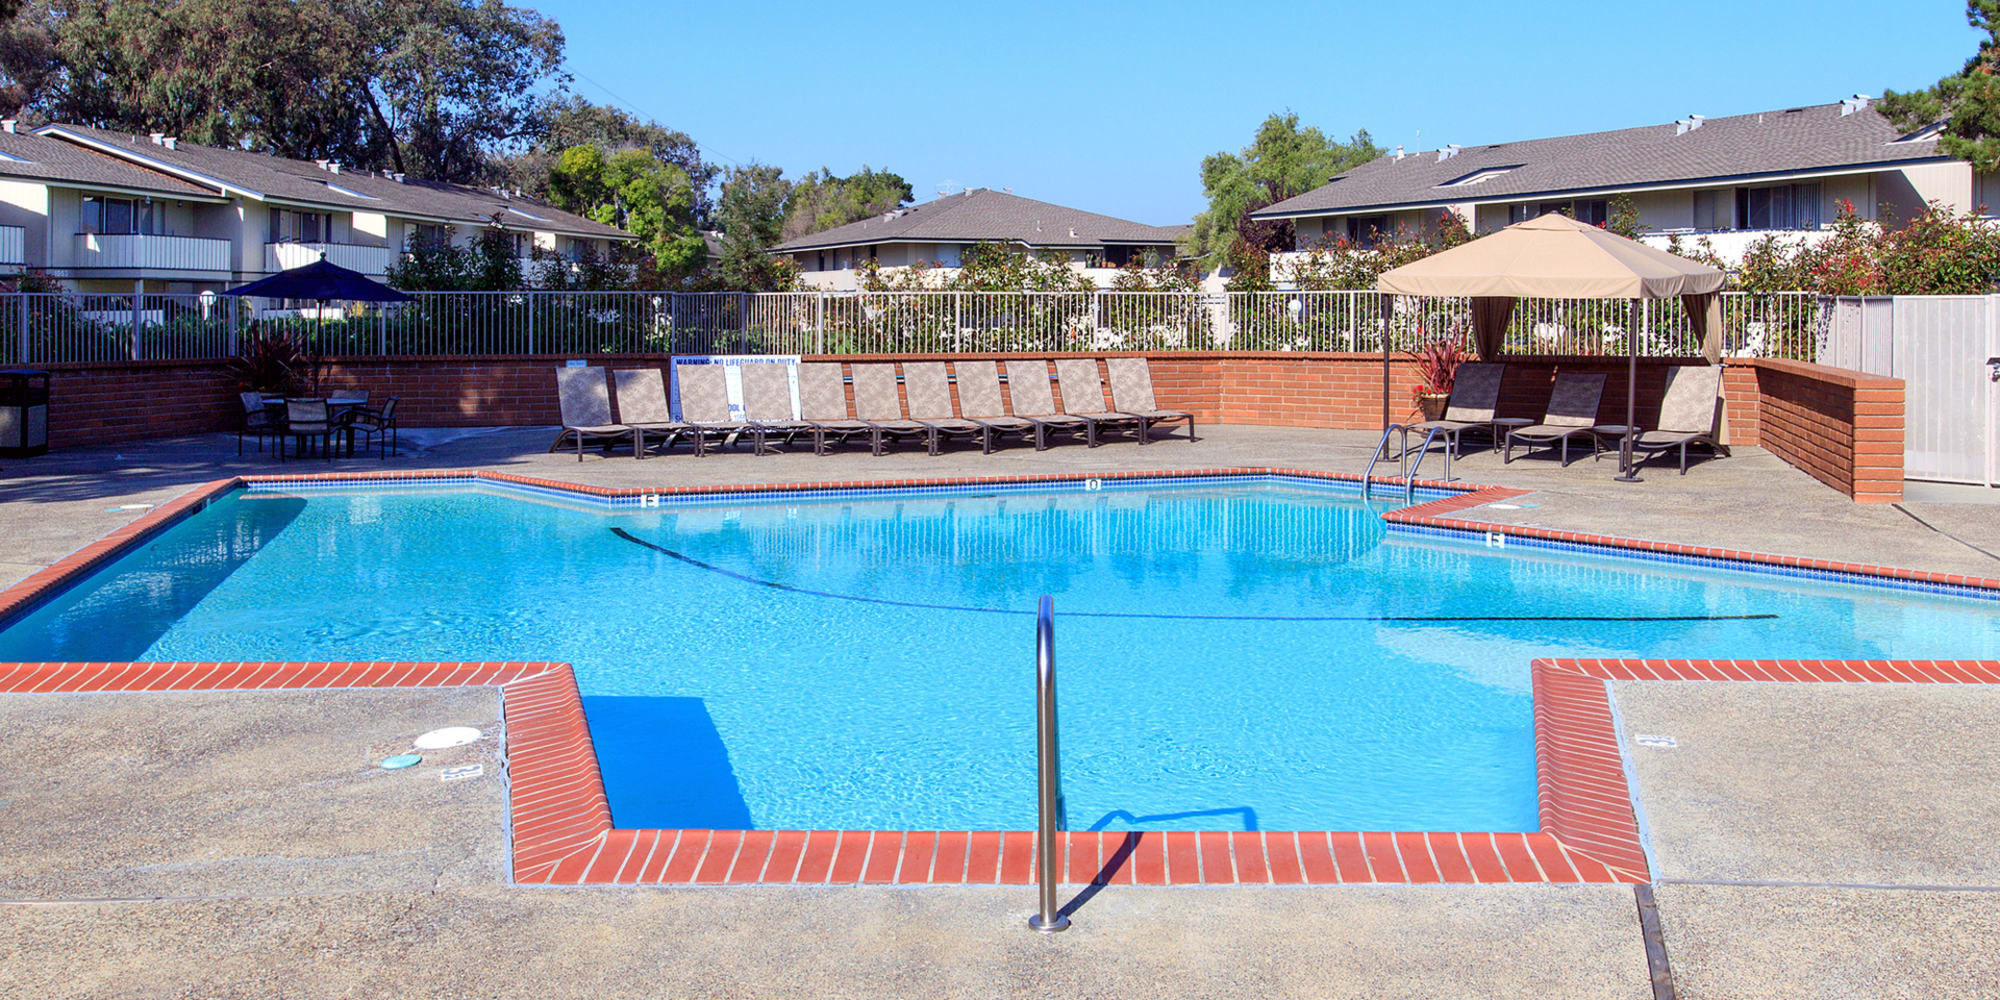 Pool area at Shadow Cove Apartments in Foster City, California